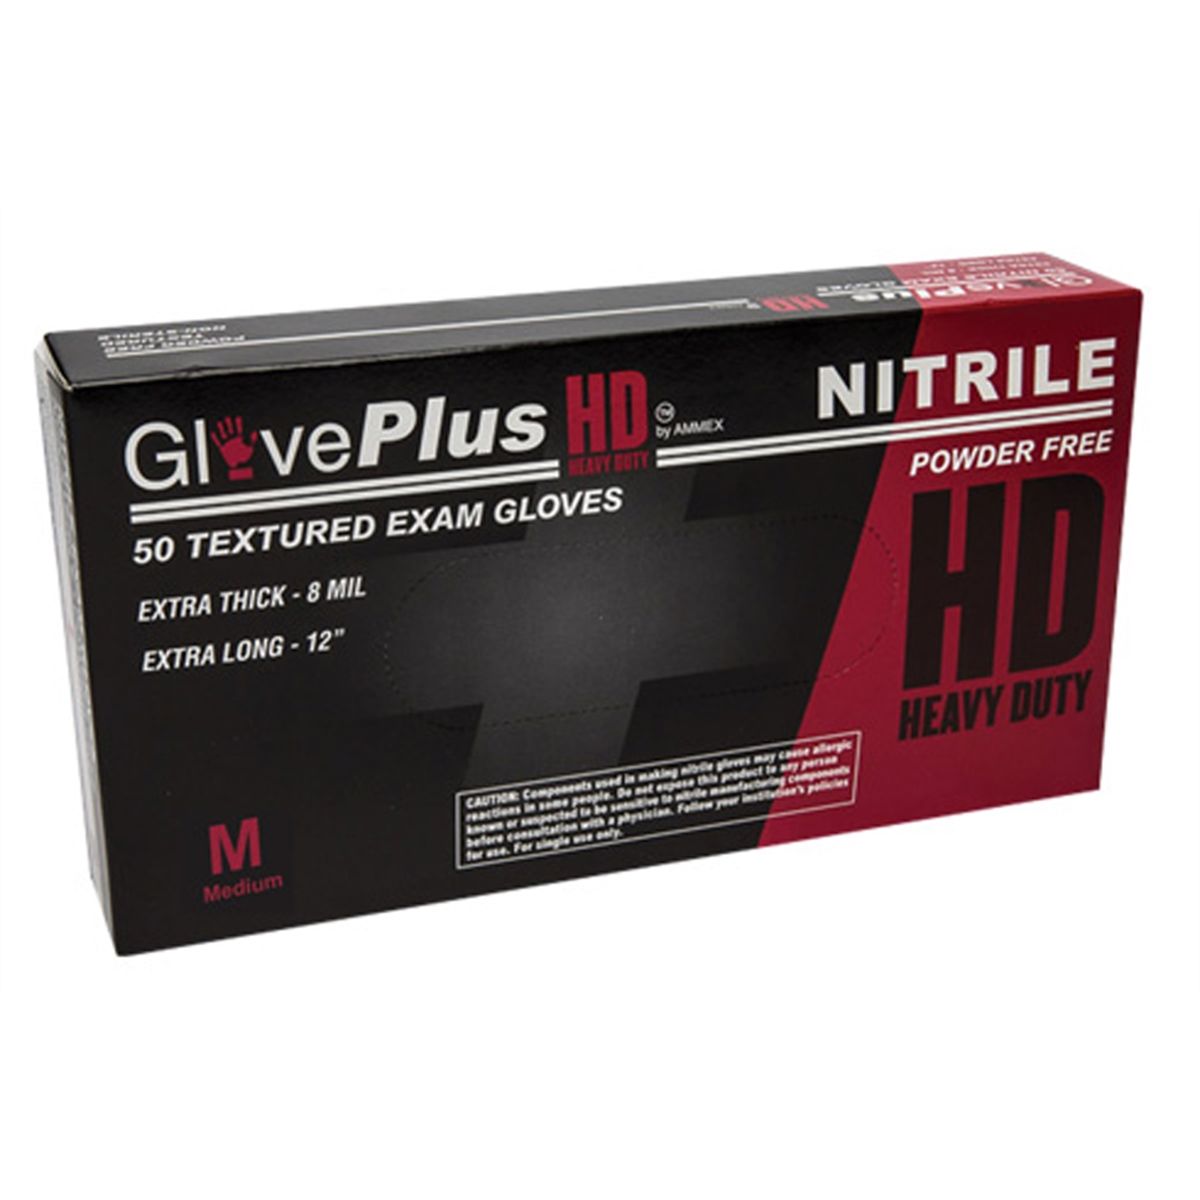 M GlovePlus HD PF, Textured, Extra Long Nitrile